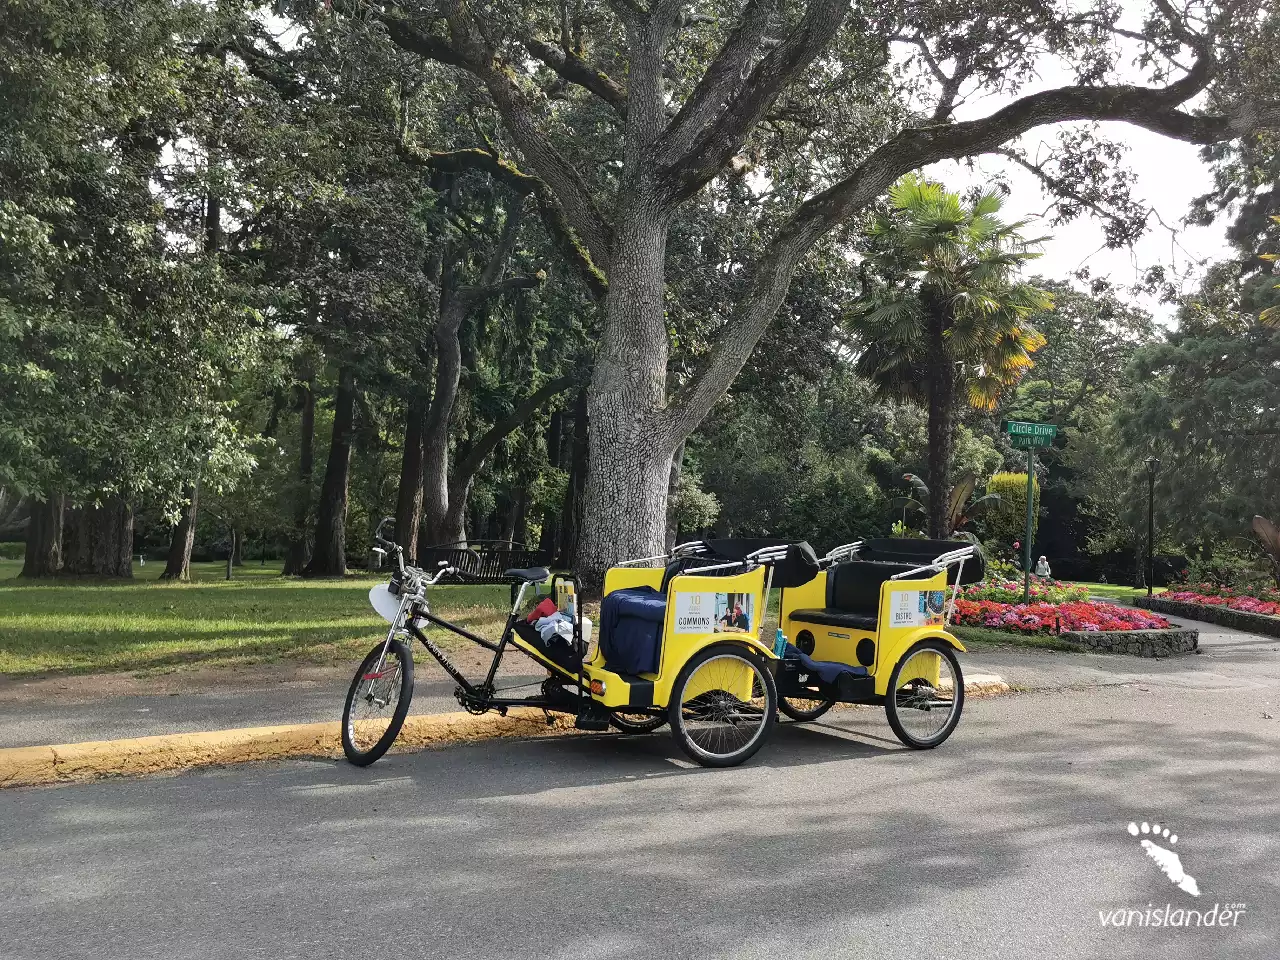 View of Bicycle Taxi in the middle of street - Victoria,  Vancouver Island